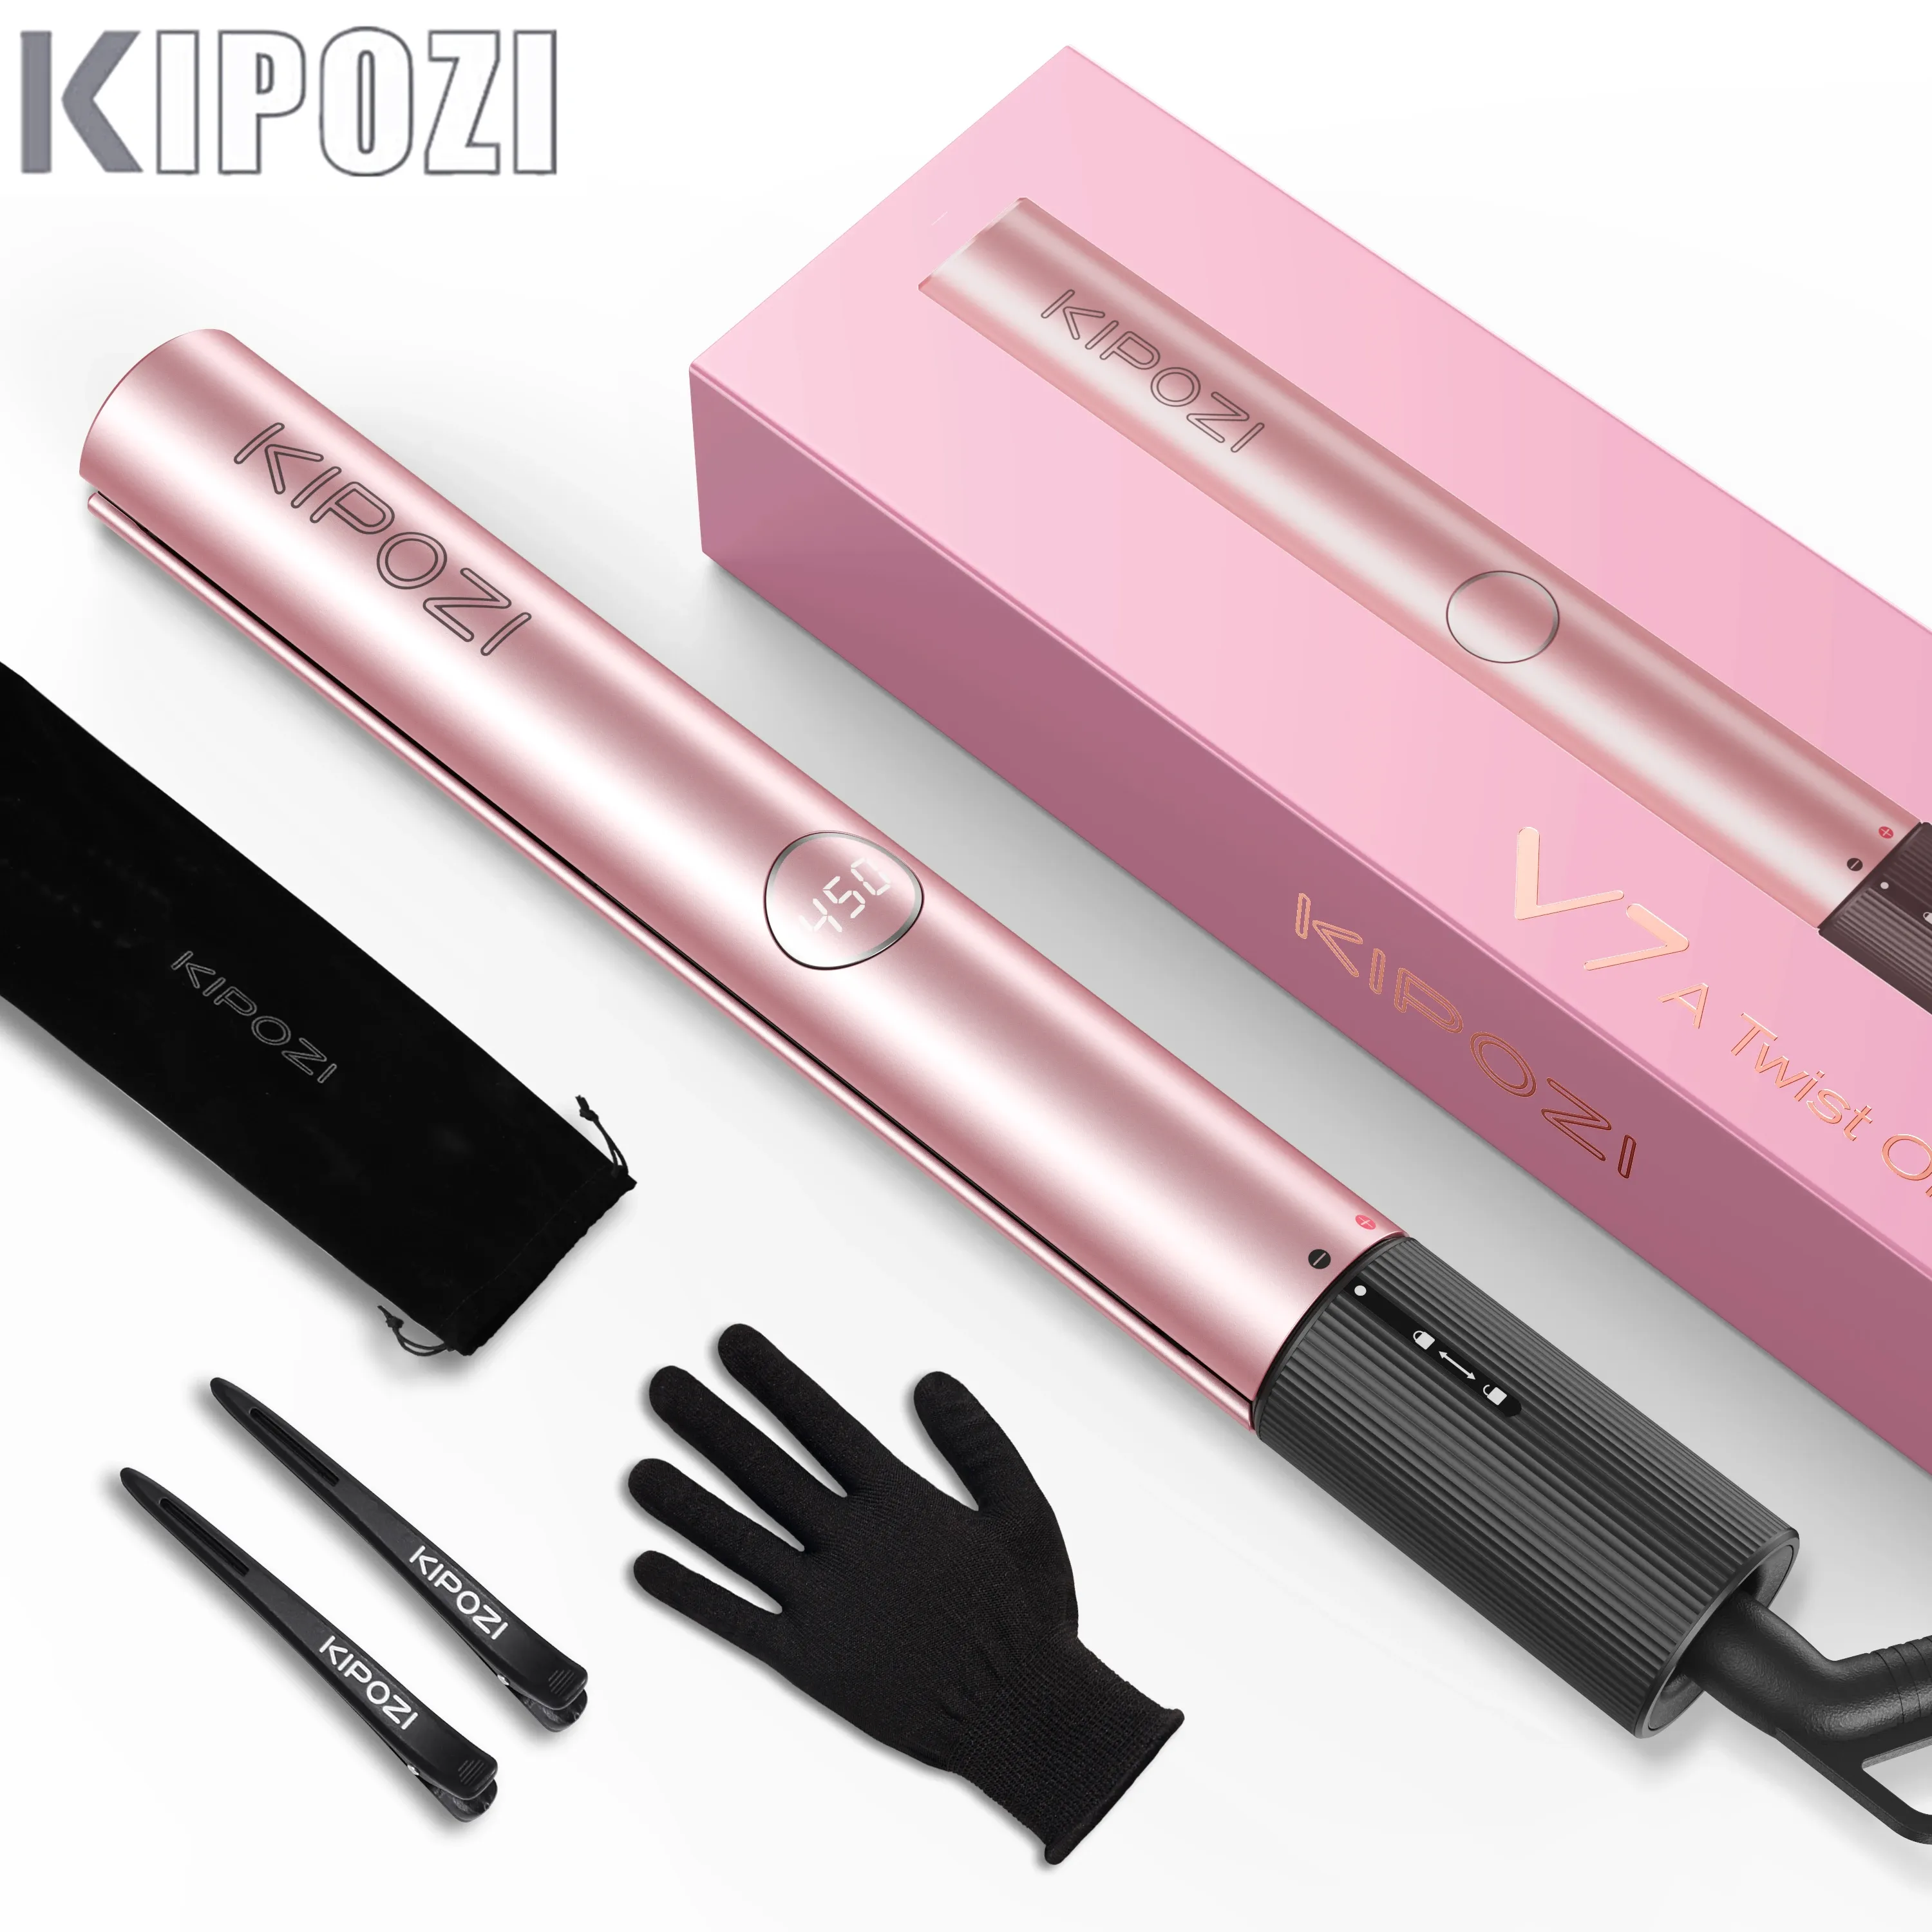 Irons KIPOZI Professional Hair Striaghtener Nano Titanium Instant Heating Flat Iron 2 In 1 Curling Iron Hair Tool with LCD Display